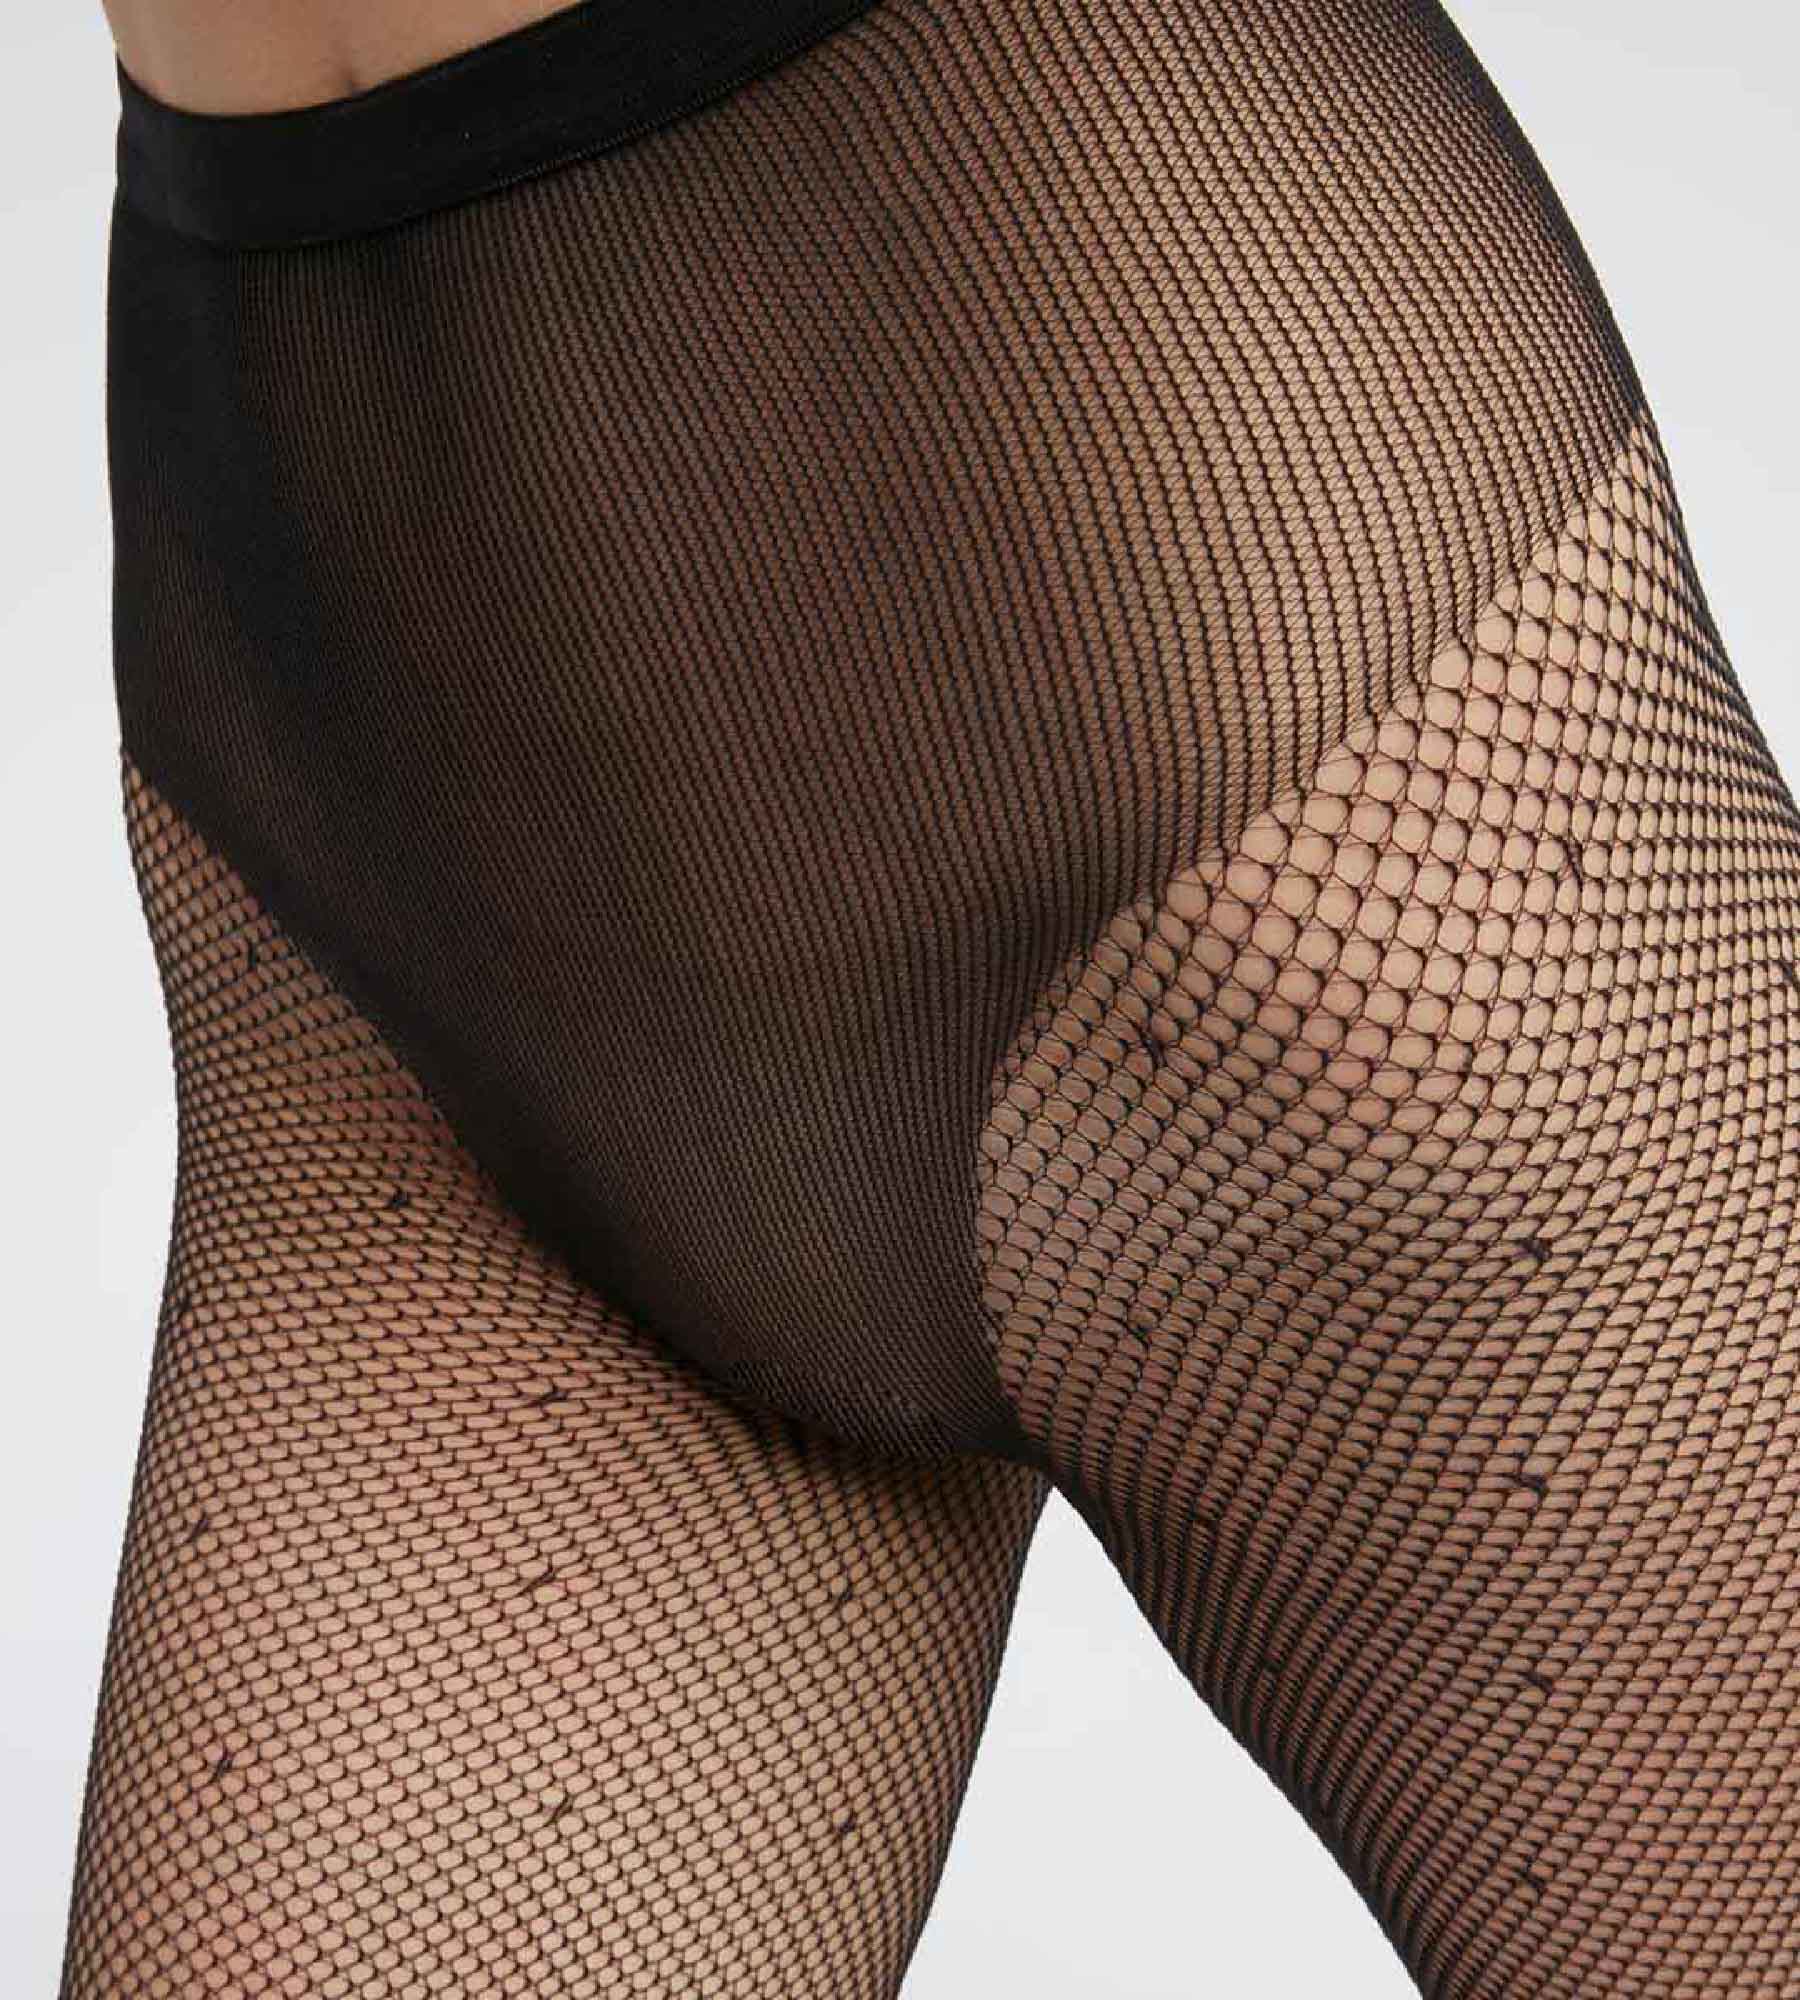 Black Sheer Dotted Tights Women Vintage Tights Style Retro Nylon 